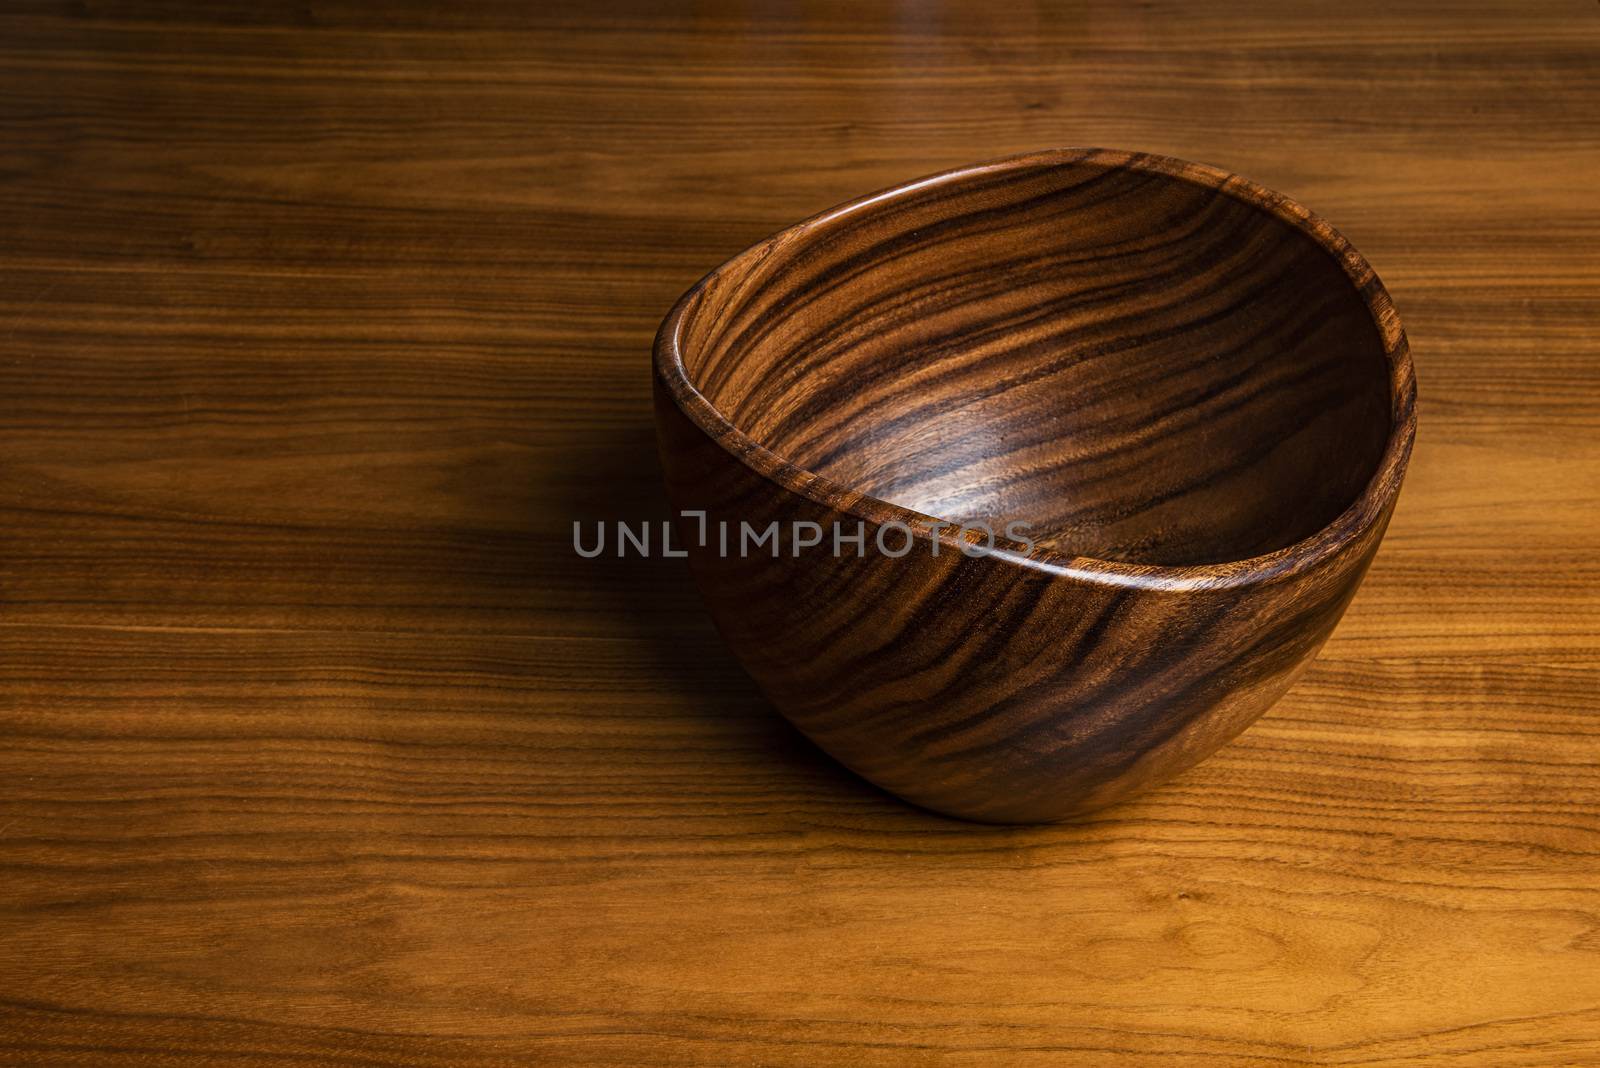 Bowl lying on a desk. Both created from walnut tree wood